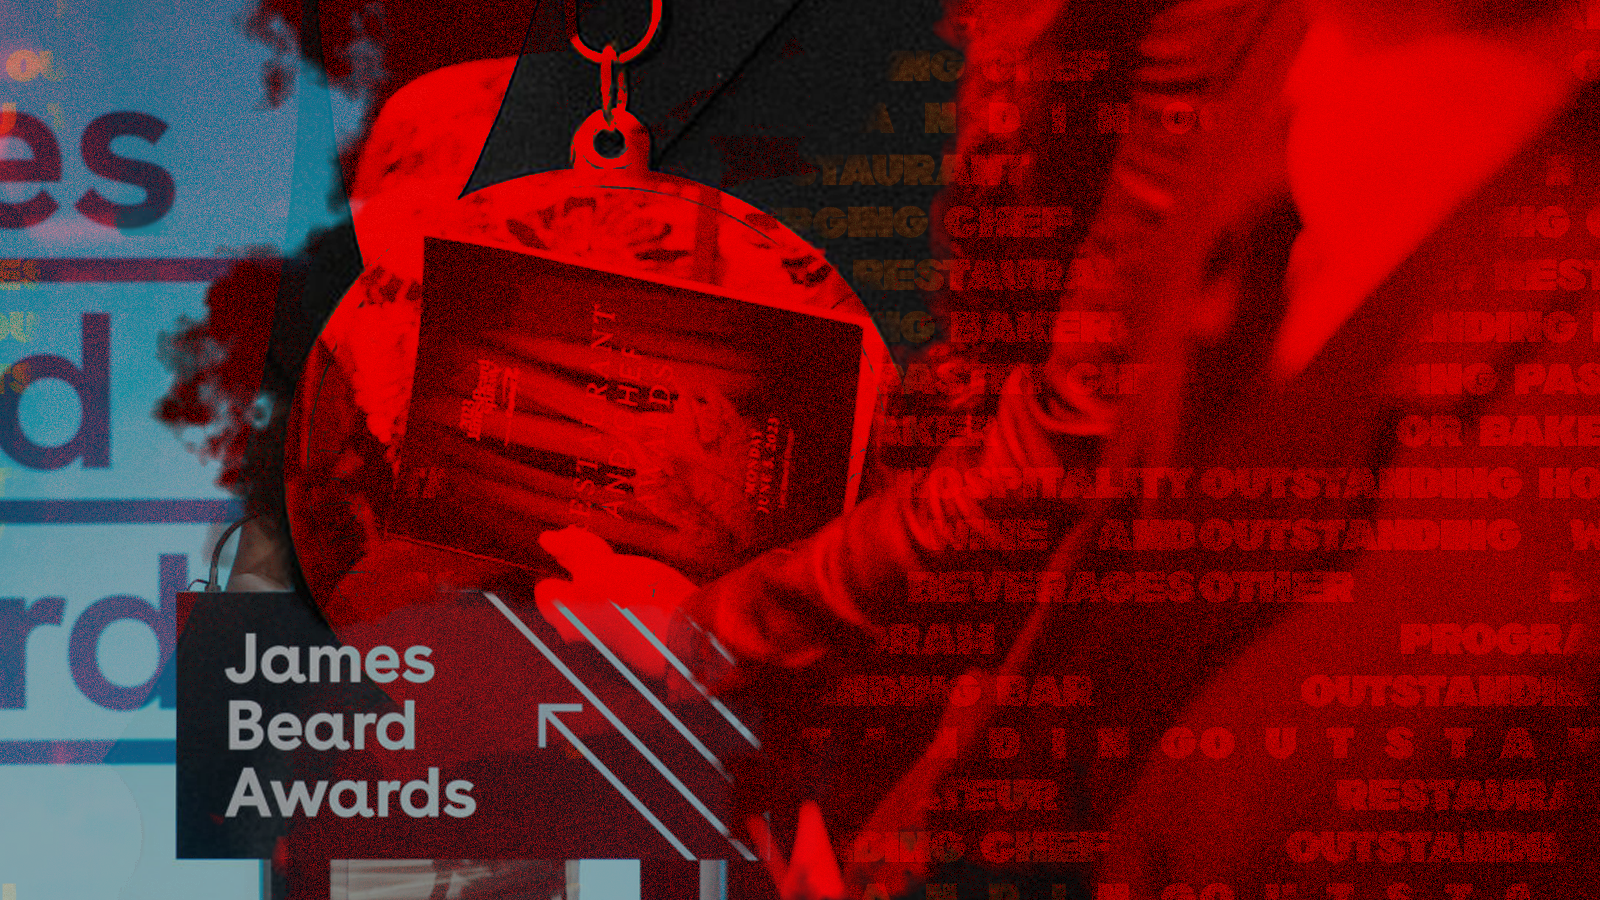 A composite image with the text “James Beard Awards” superimposed over a red and blue textured layout.